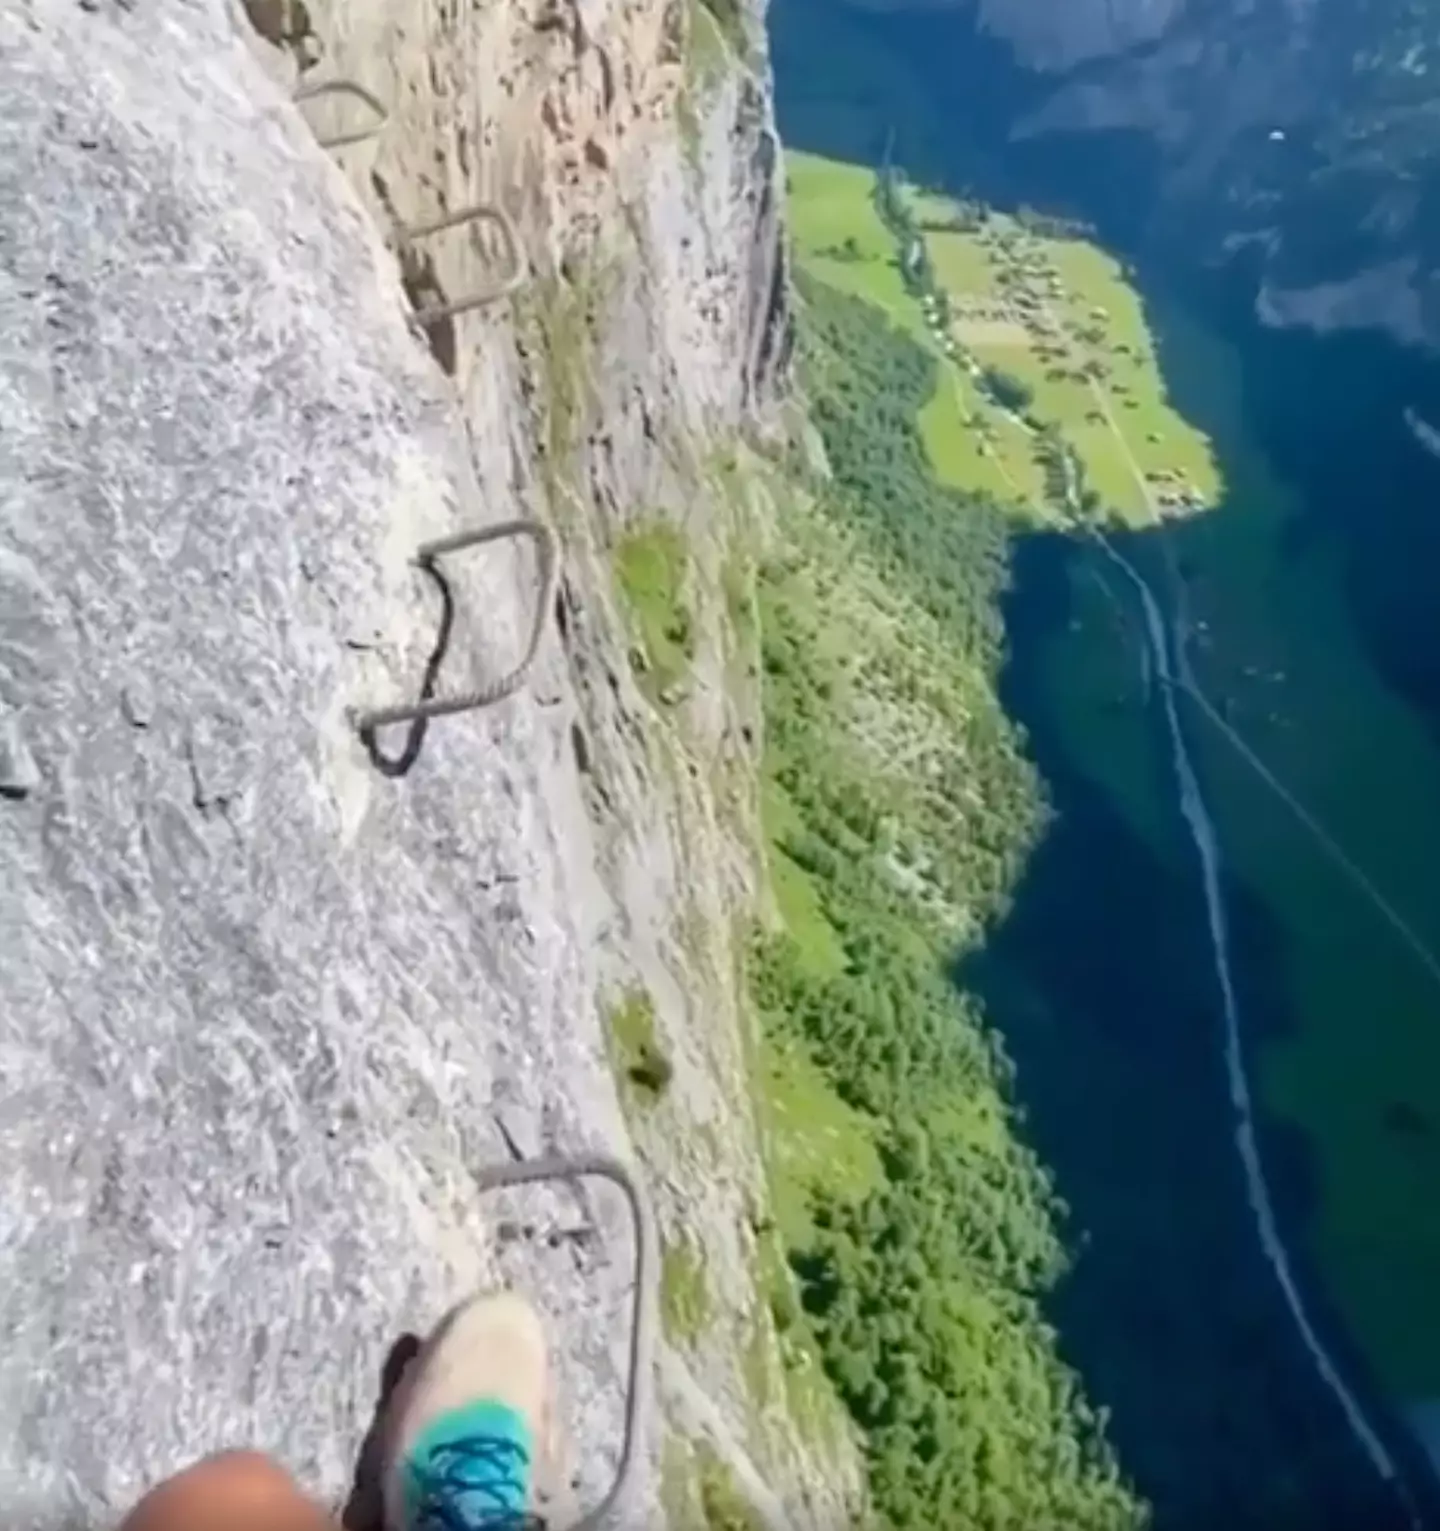 The clip shows hikers stepping on small pieces of rebar steps that have been installed